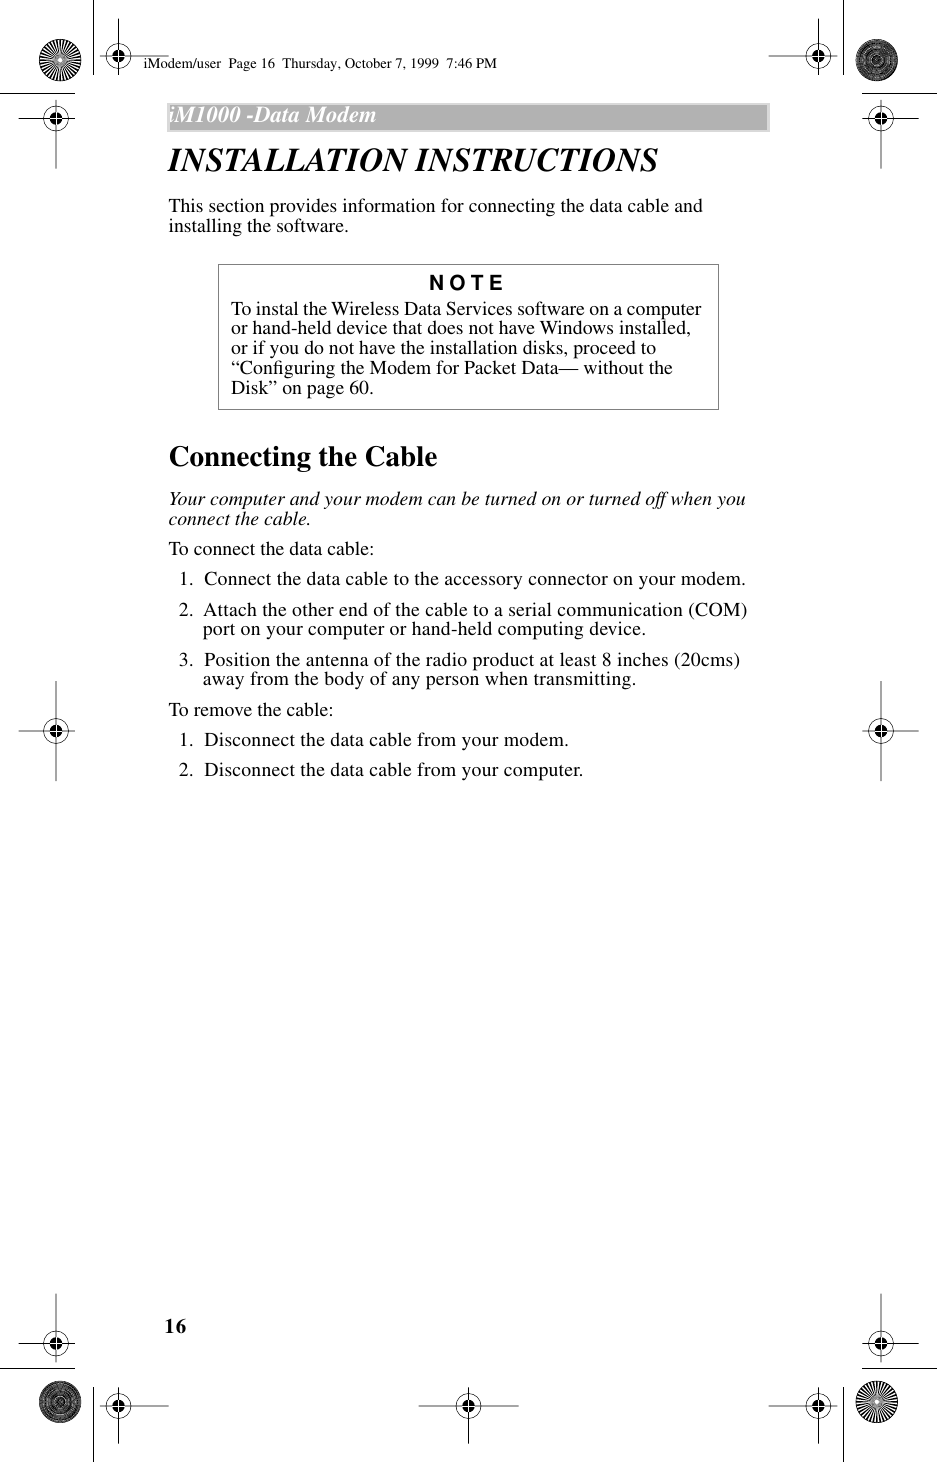 16iM1000 -Data Modem  INSTALLATION INSTRUCTIONS This section provides information for connecting the data cable and installing the software. Connecting the CableYour computer and your modem can be turned on or turned off when you connect the cable.To connect the data cable:  1.  Connect the data cable to the accessory connector on your modem.   2.  Attach the other end of the cable to a serial communication (COM) port on your computer or hand-held computing device.  3.  Position the antenna of the radio product at least 8 inches (20cms) away from the body of any person when transmitting. To remove the cable:  1.  Disconnect the data cable from your modem.   2.  Disconnect the data cable from your computer. NOTETo instal the Wireless Data Services software on a computer or hand-held device that does not have Windows installed, or if you do not have the installation disks, proceed to “Conﬁguring the Modem for Packet Data— without the Disk” on page 60.iModem/user  Page 16  Thursday, October 7, 1999  7:46 PM